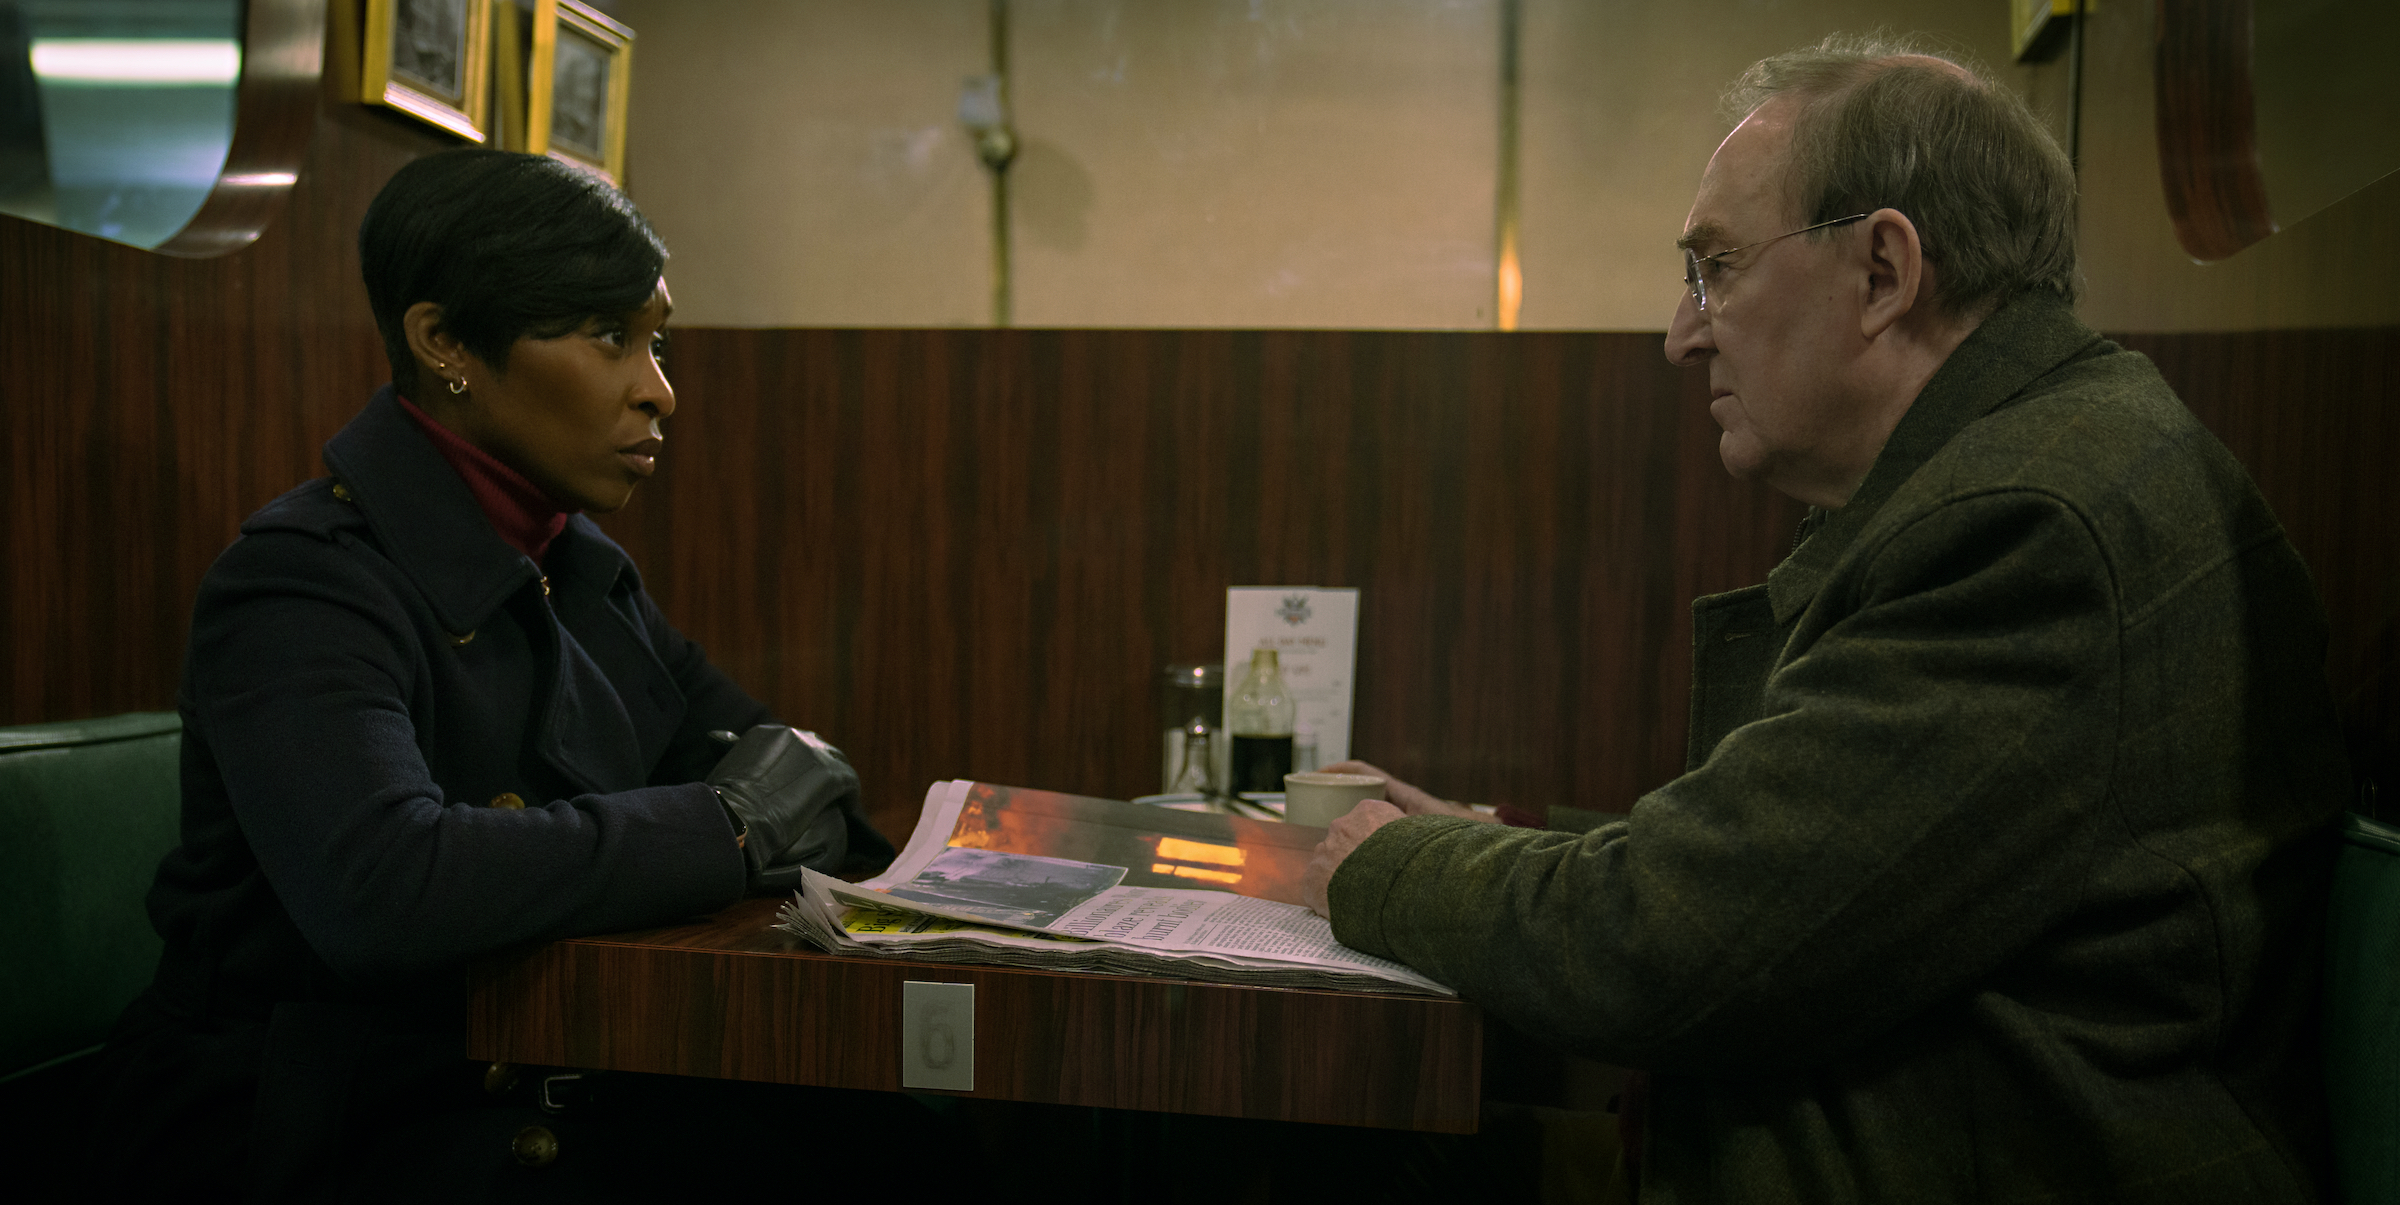 Current Detective Chief Inspector Odette Raine (Cynthia Erivo) enlists the help of retired Detective Superintendent Martin Schenk (Dermot Crowley) to try to catch Luther. (John Wilson—Netflix)